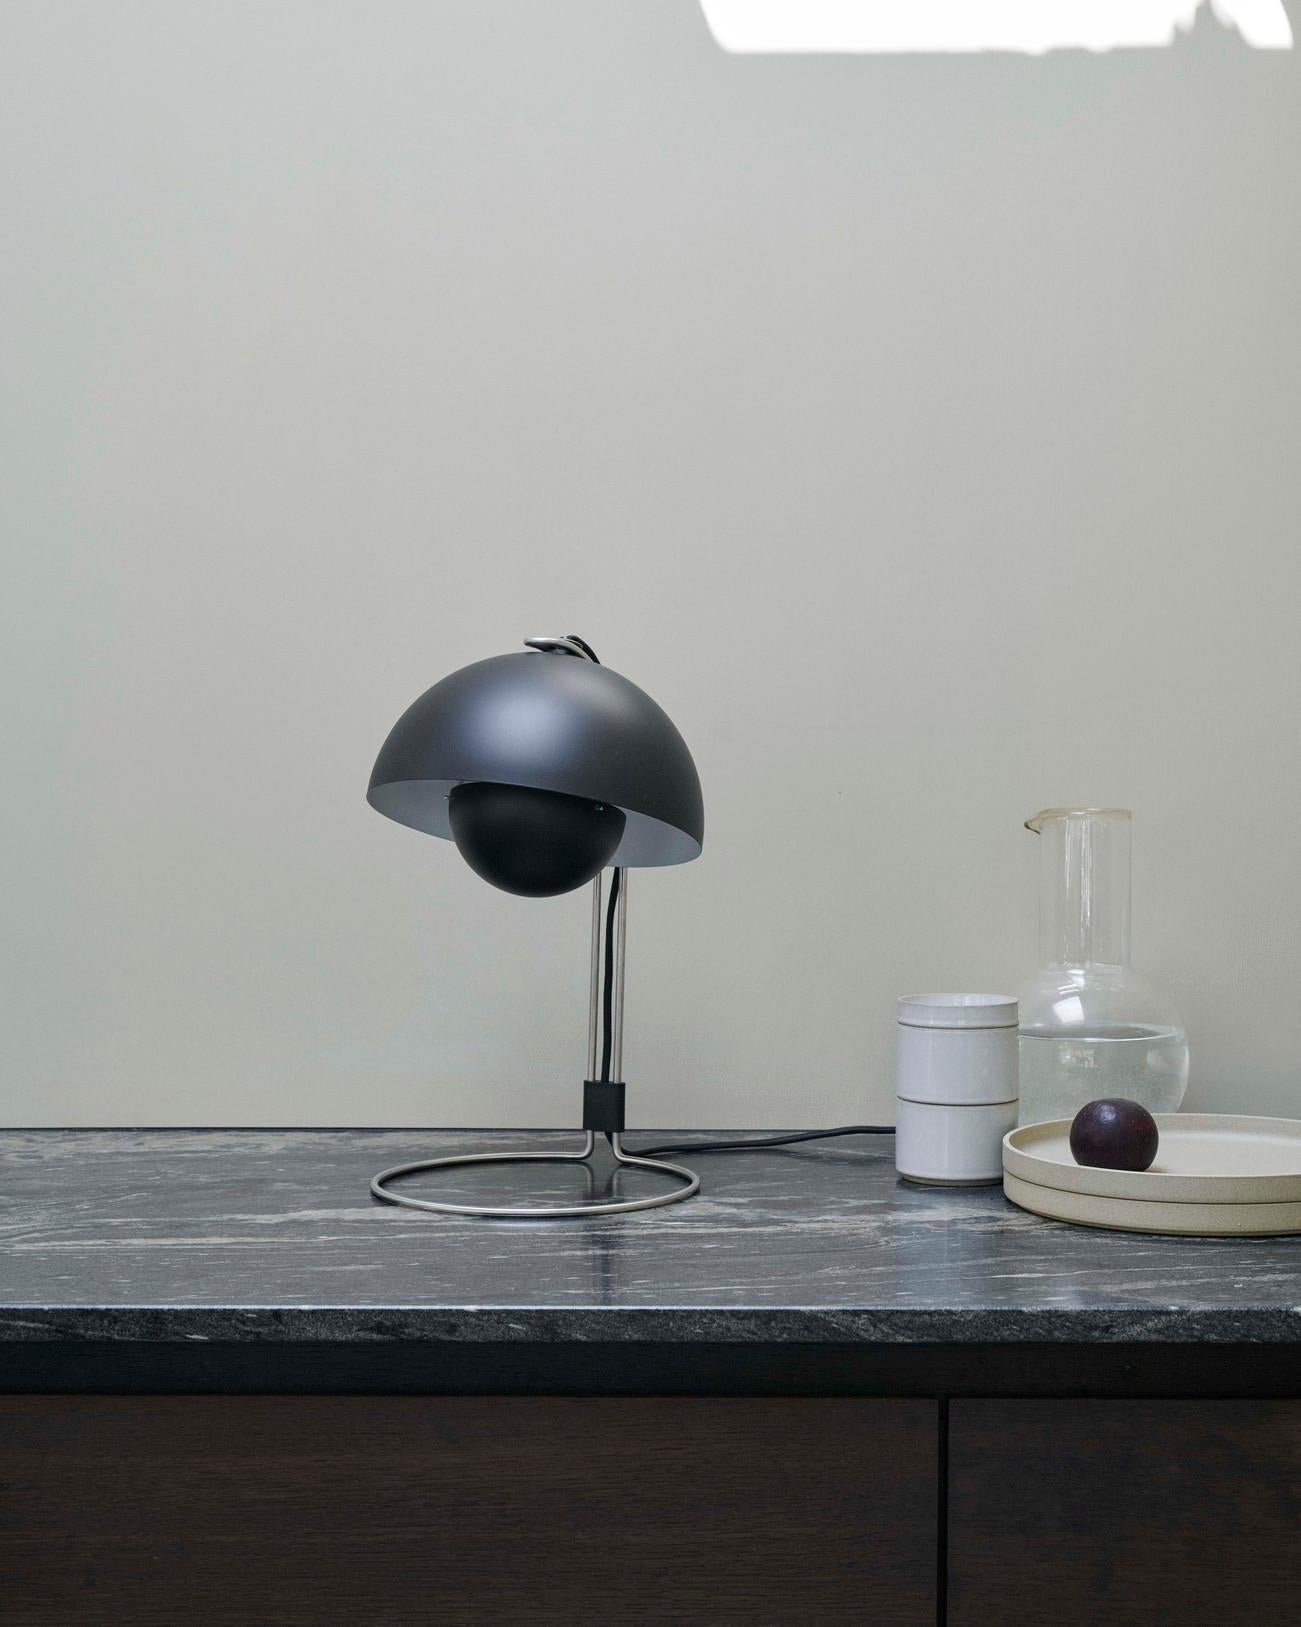 Among the most norm-breaking Danish designs of the 1960s, the iconic form of Verner Panton's Flowerpot includes the uniquely designed VP4 model, which adapts the Flowerpot into a stylish table lamp

Color : Matt Black

Environment
Indoor